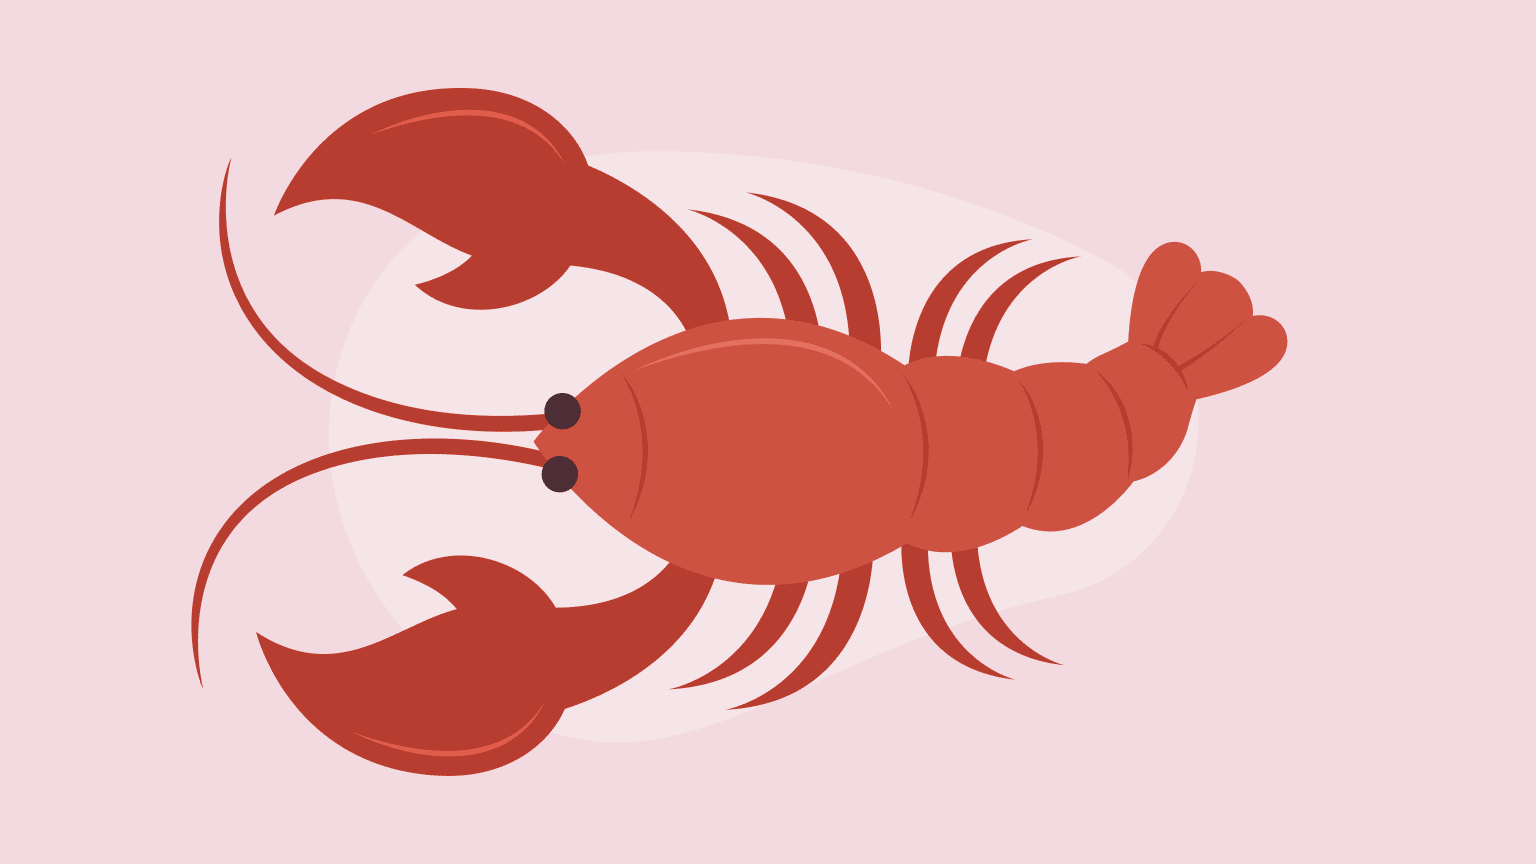 The Wisdom of Lobsters: If You Want to Grow, You Have to Break Out of Your Shell